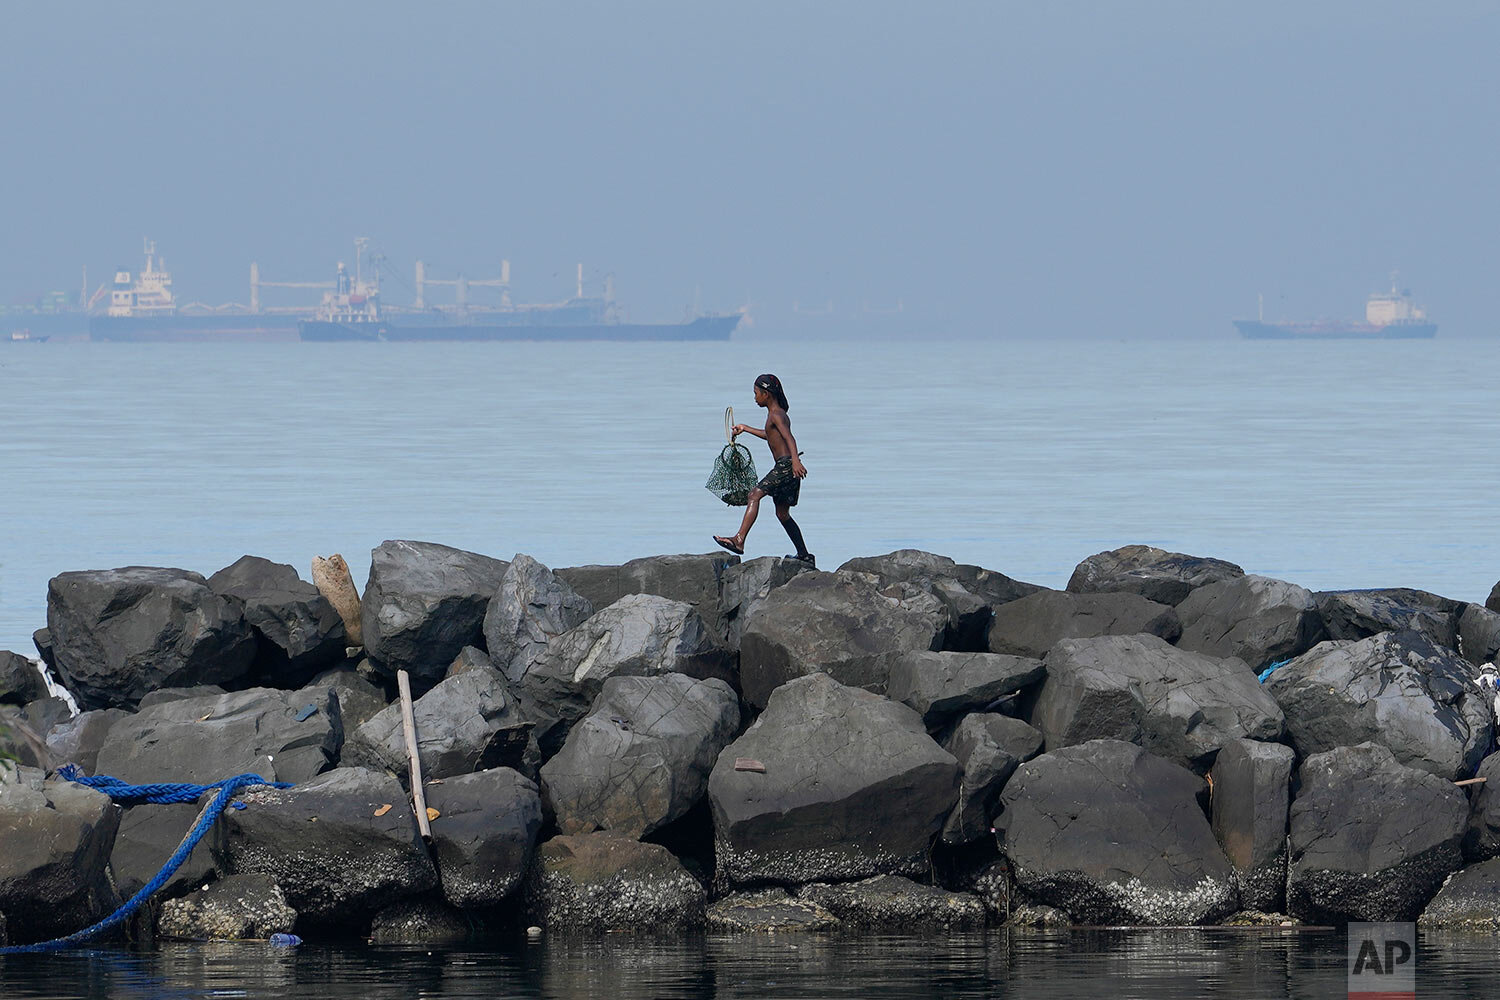  A boy holds his day's catch of crabs as he walks along the breakwater in Manila, Philippines on Saturday, Sept. 25, 2021. (AP Photo/Aaron Favila) 